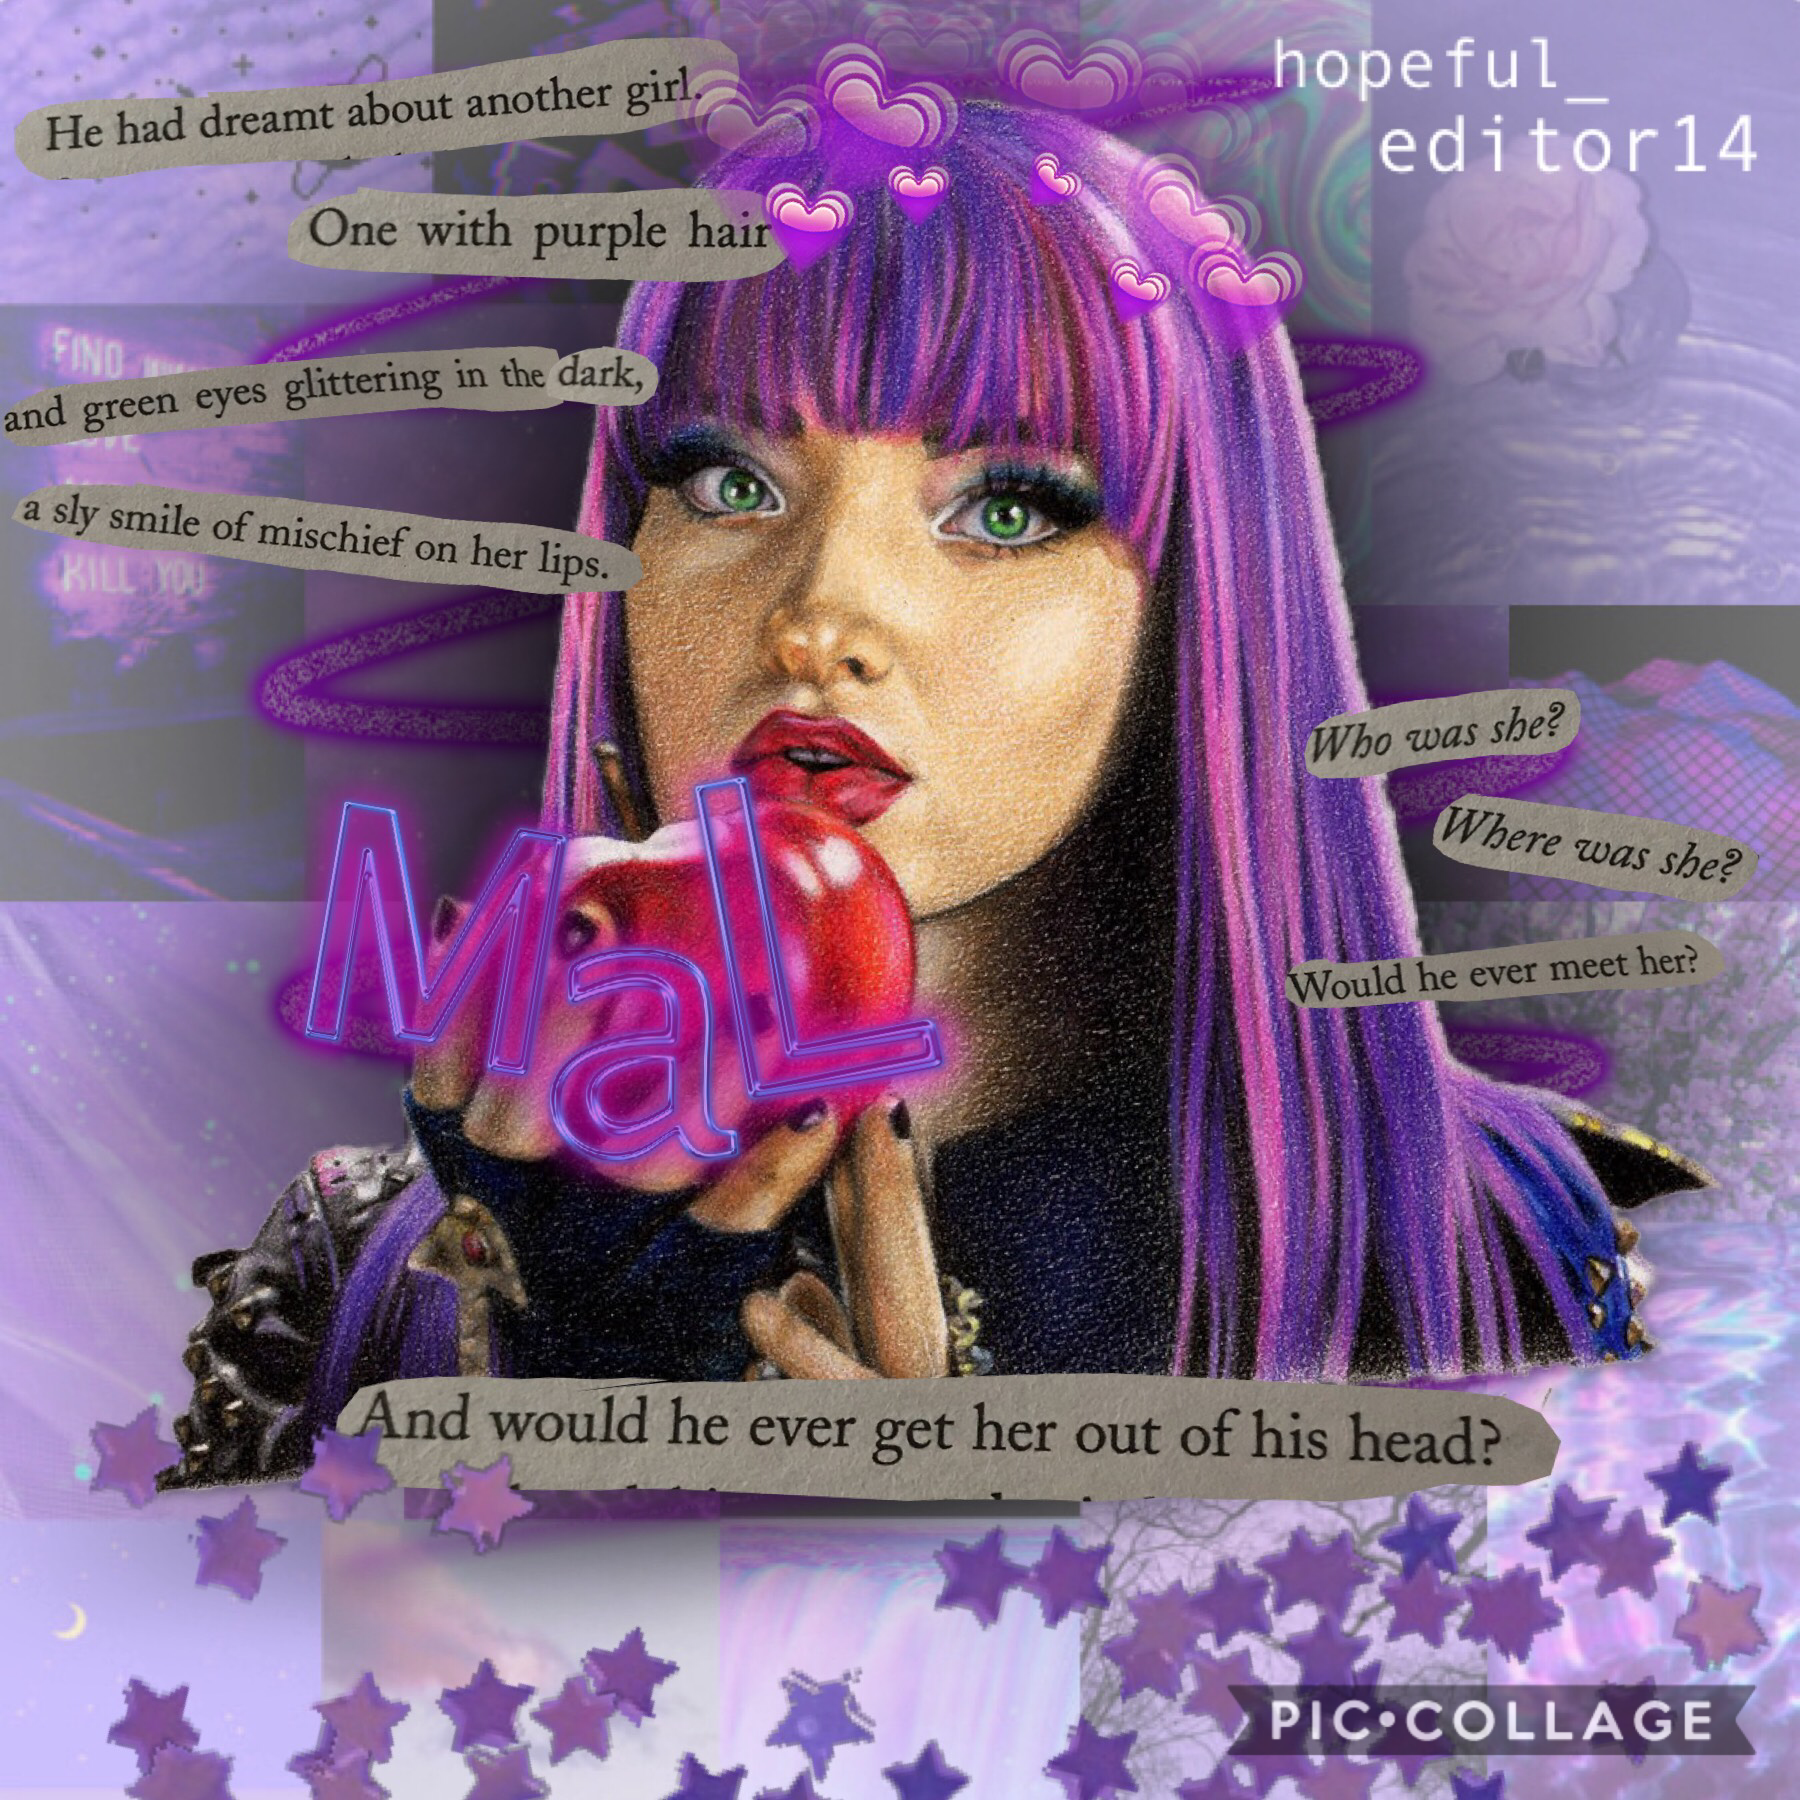 t a p
What do you think of this collage?
I kind of love it!!!
The words are a picture j took of the first isle of the lost book! If you haven't read them, I recommend them because they are great and help explain the story better!! QOTD: do you think Malef